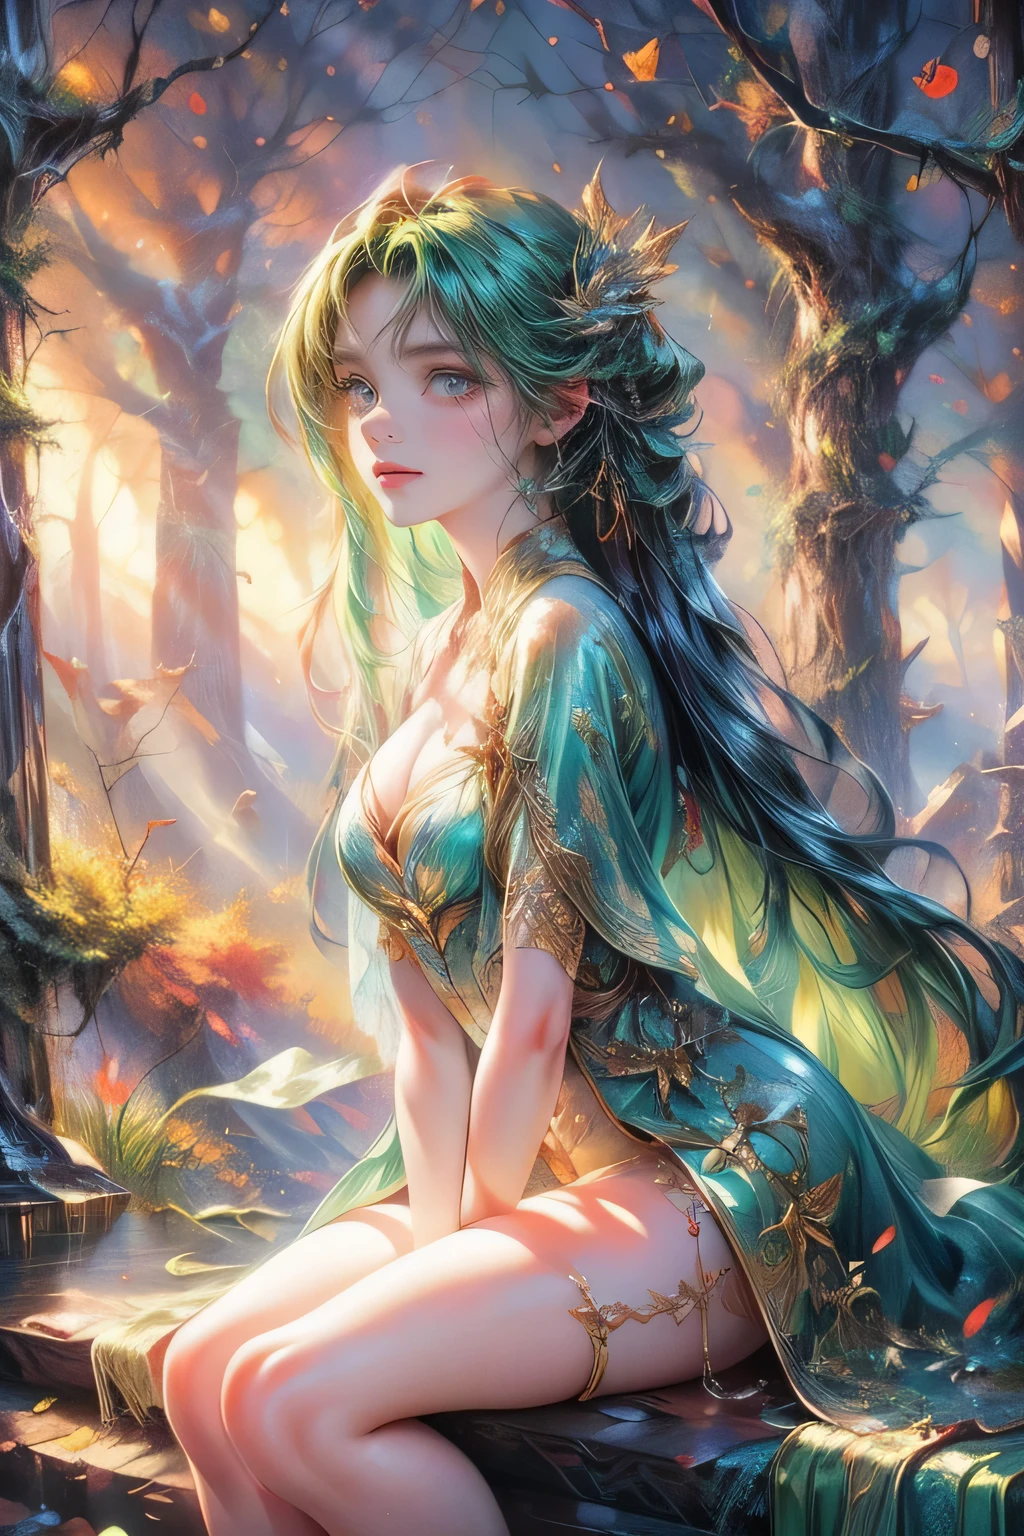 full-body view, masterpiece:1.2, highest quality, highres, 16k, ultra-realistic, photorealistic:1.37, beautifuldetailed, anime style illustration, 1girl, princess, light green hair, green forest spirit, beautiful light green hair, nature, fantastical, detailed face, beautiful light green eyes, expressive eyes, detailed lips, sitting on a branch on a high tree, legs dangling,ultra-detailed,intricate details, vibrant colors, fantasy art, digital painting, cinematic lighting, magical, cinematic angle,